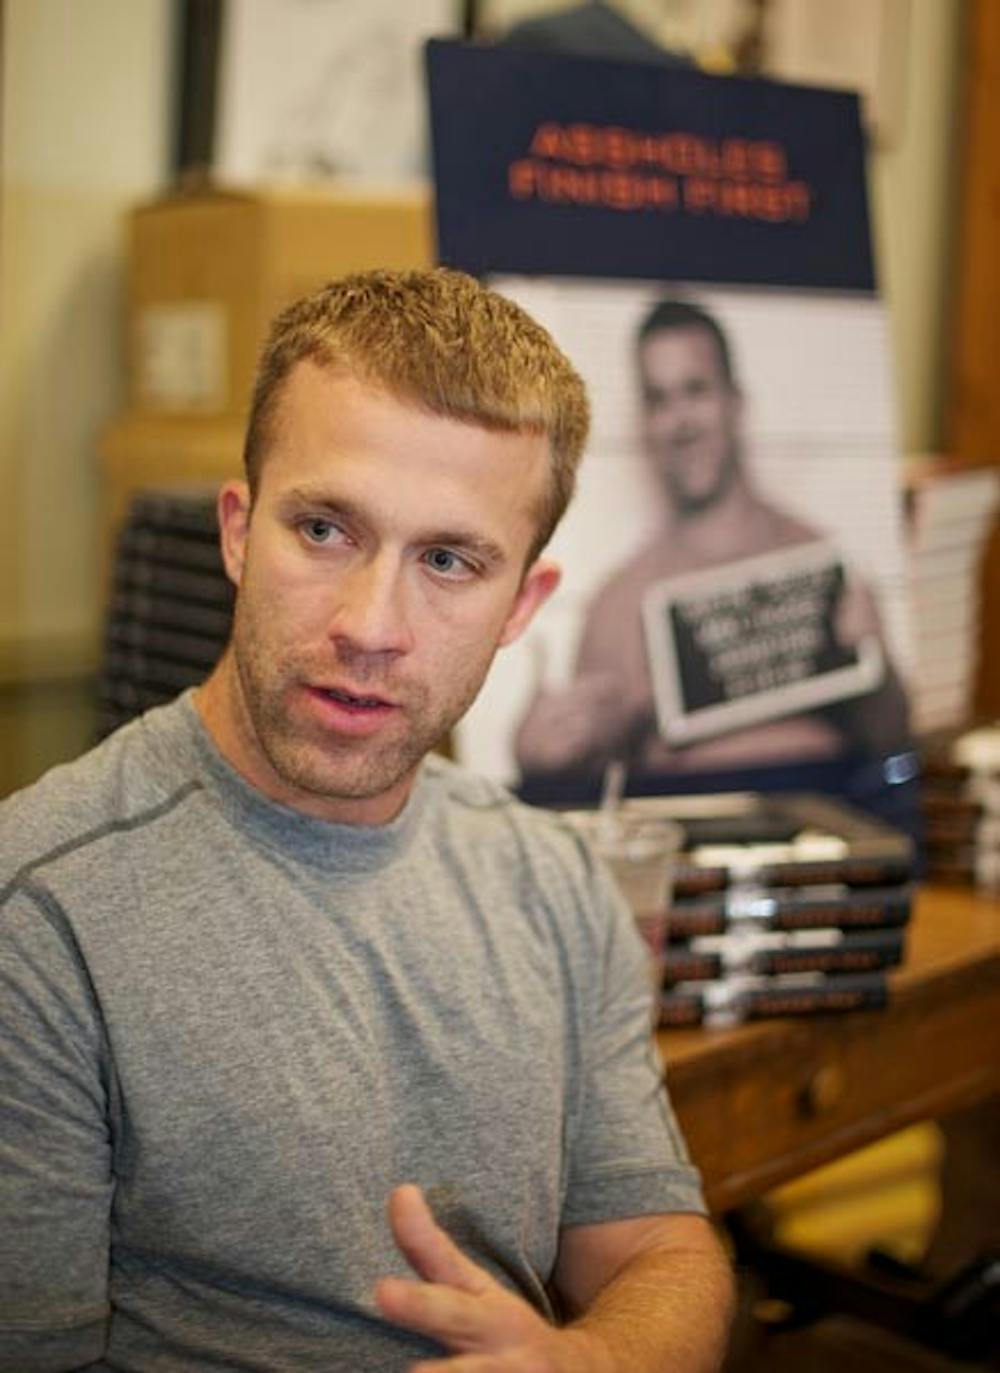 FINISHING FIRST: Best-selling author and law school graduate Tucker Max of "I Hope They Serve Beer in Hell" answers questions posted by the ASU Law School Club prior to his book signing at Changing Hands Bookstore. Max's new book, "Assholes Finish First," comes after the success of his first book, which the author wrote and produced as a movie. (Photo by Michael Arellano)